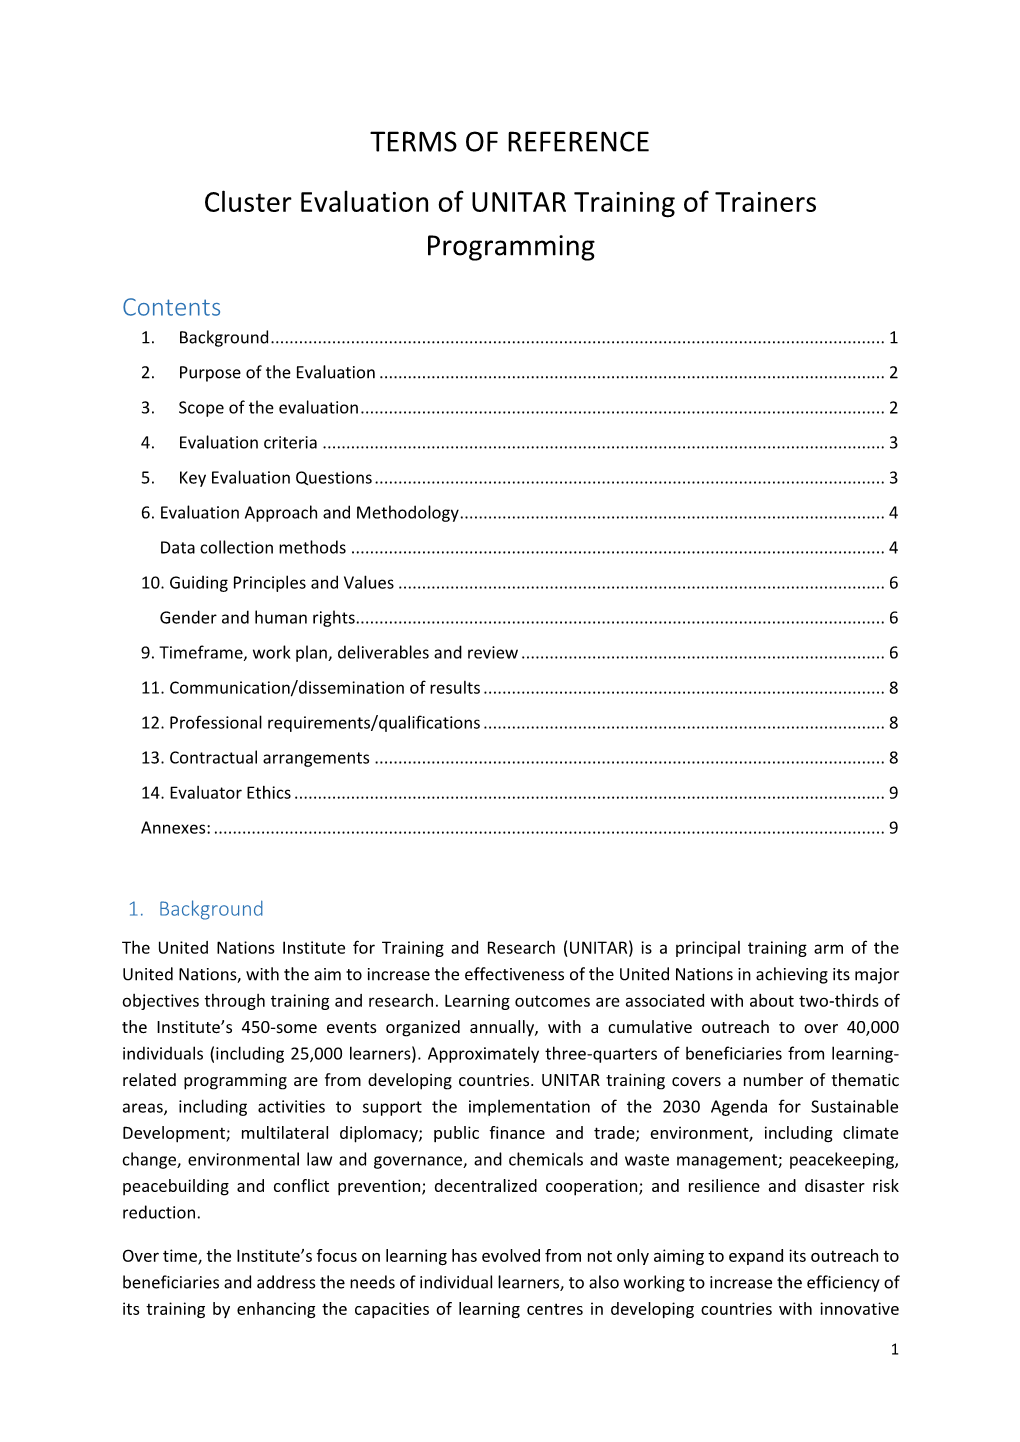 TERMS of REFERENCE Cluster Evaluation of UNITAR Training of Trainers Programming